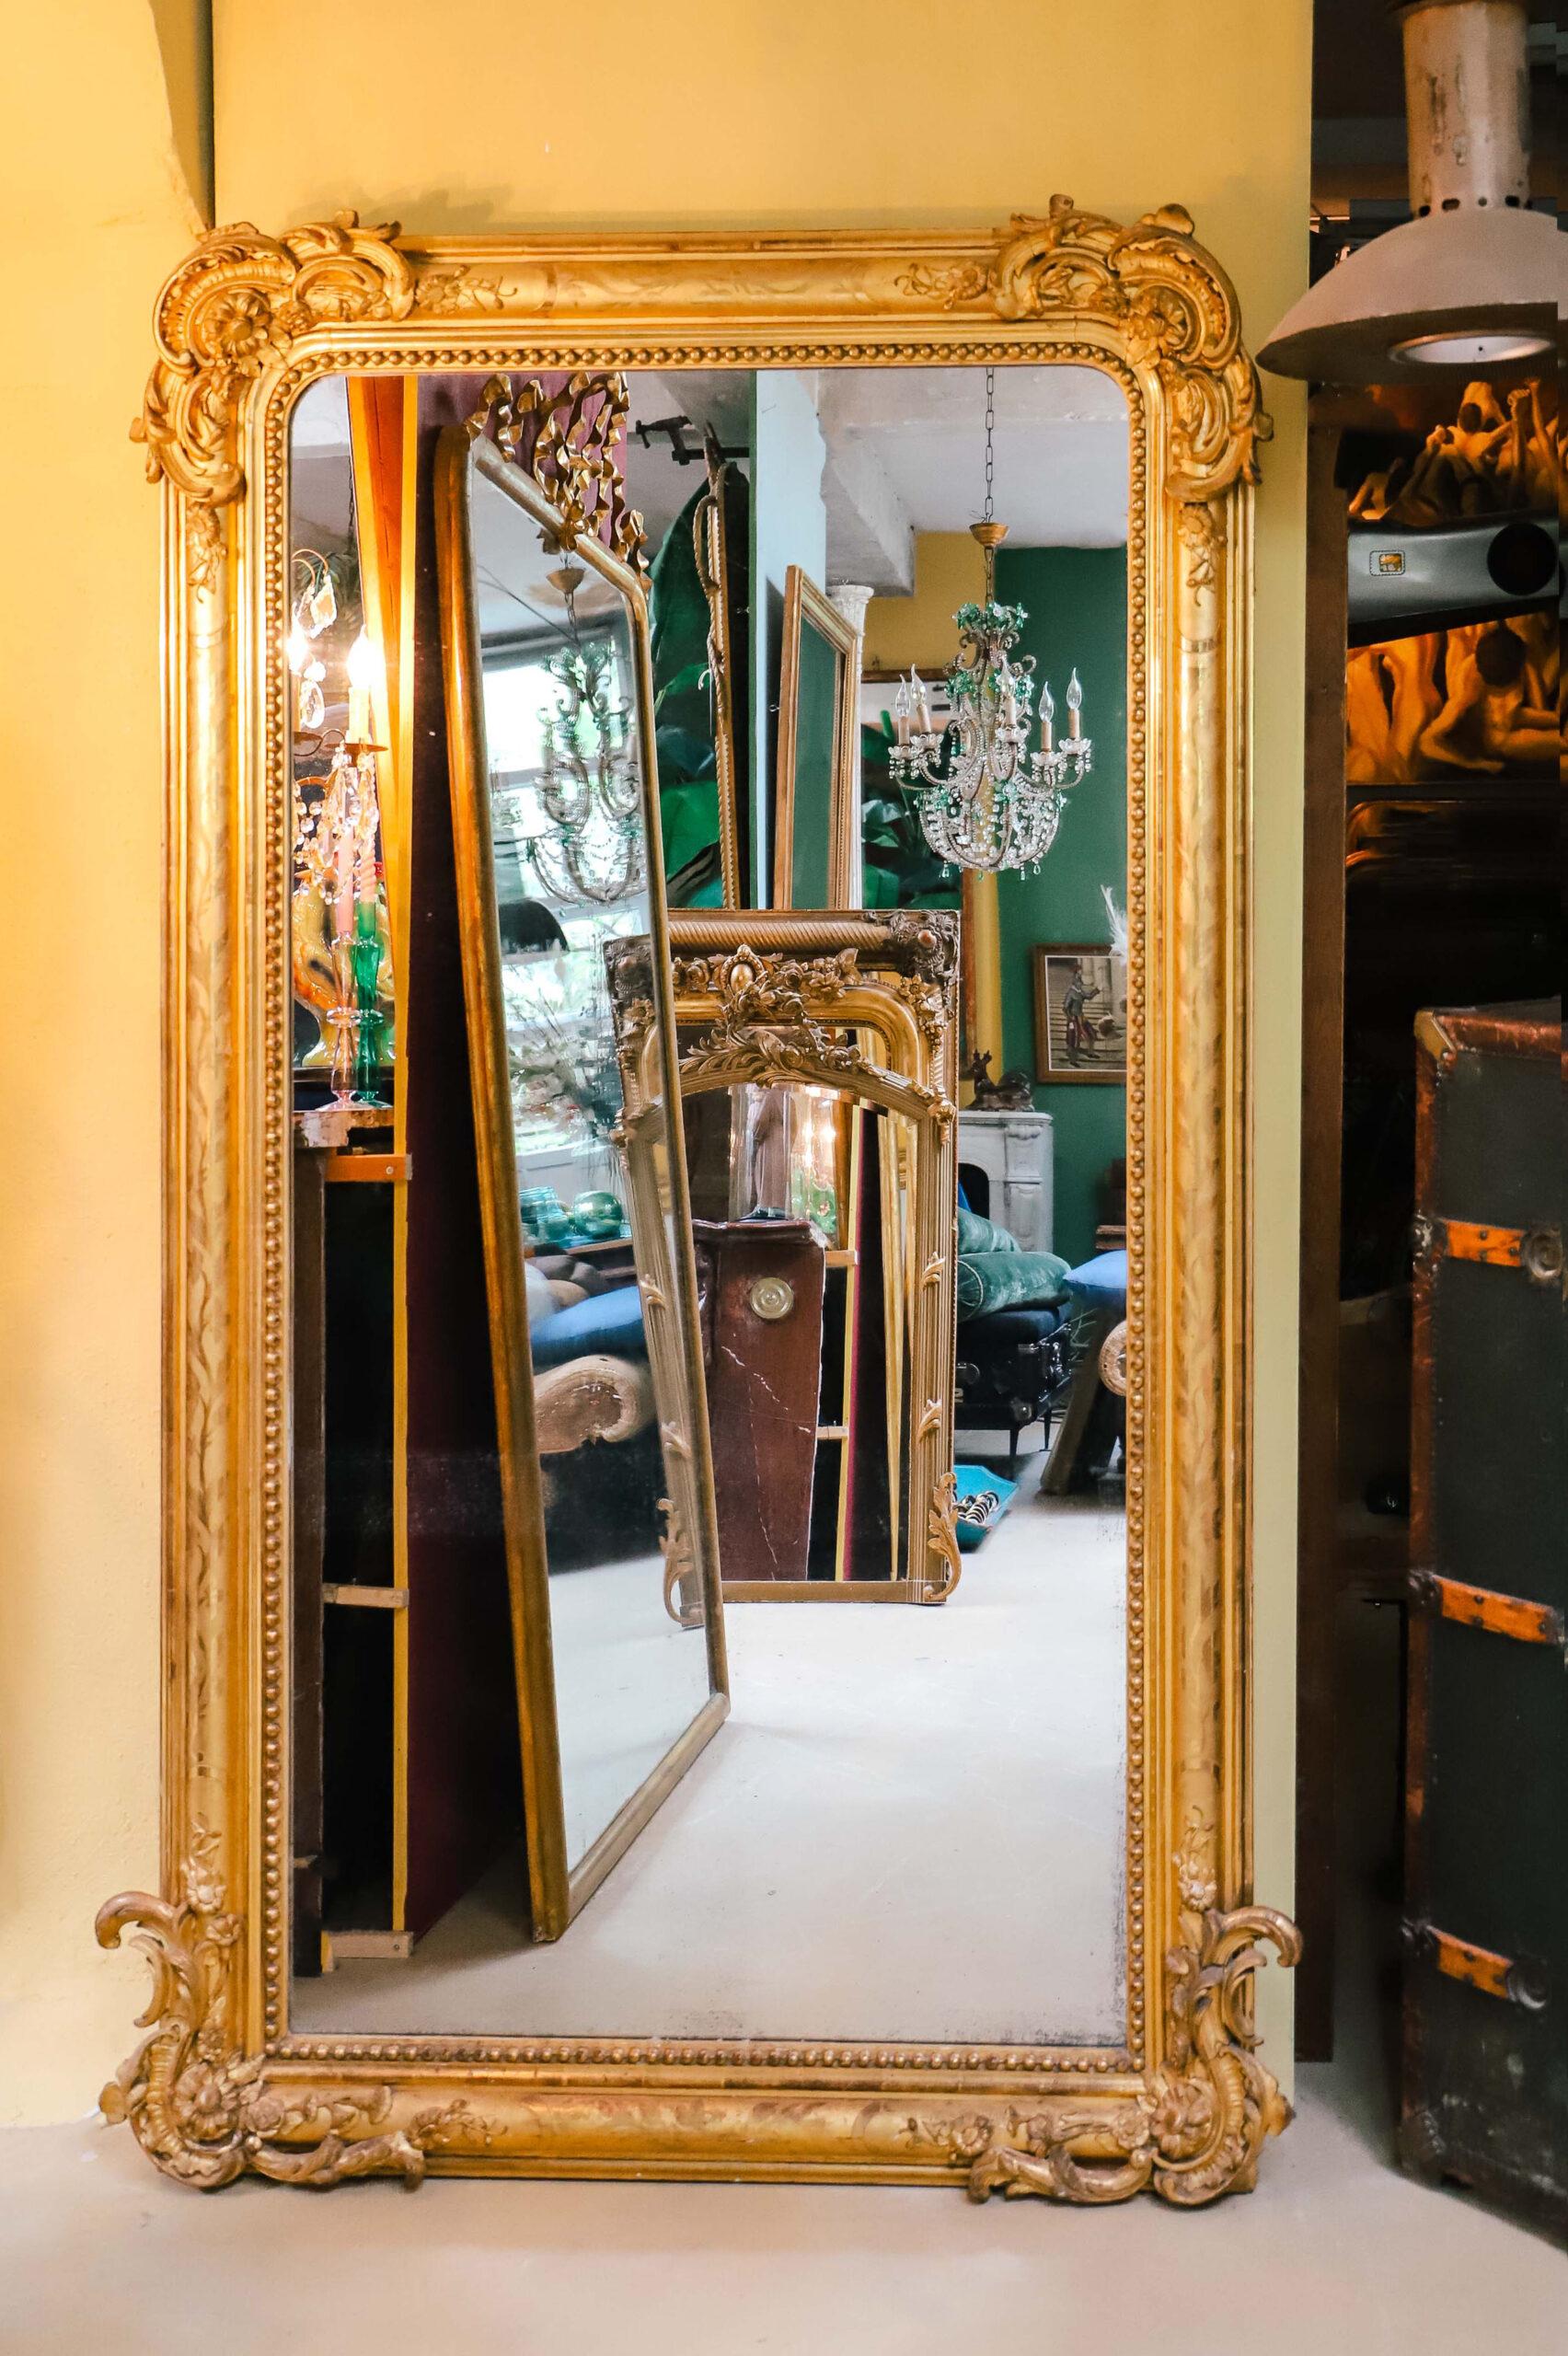 Immerse yourself in the grandeur of this stunning antique French 19th Century Louis Philippe style gold gilt mirror. The thickly decorated frame boasts intricate leaf and flower ornaments at both the upper and bottom corners, accentuated by pearl